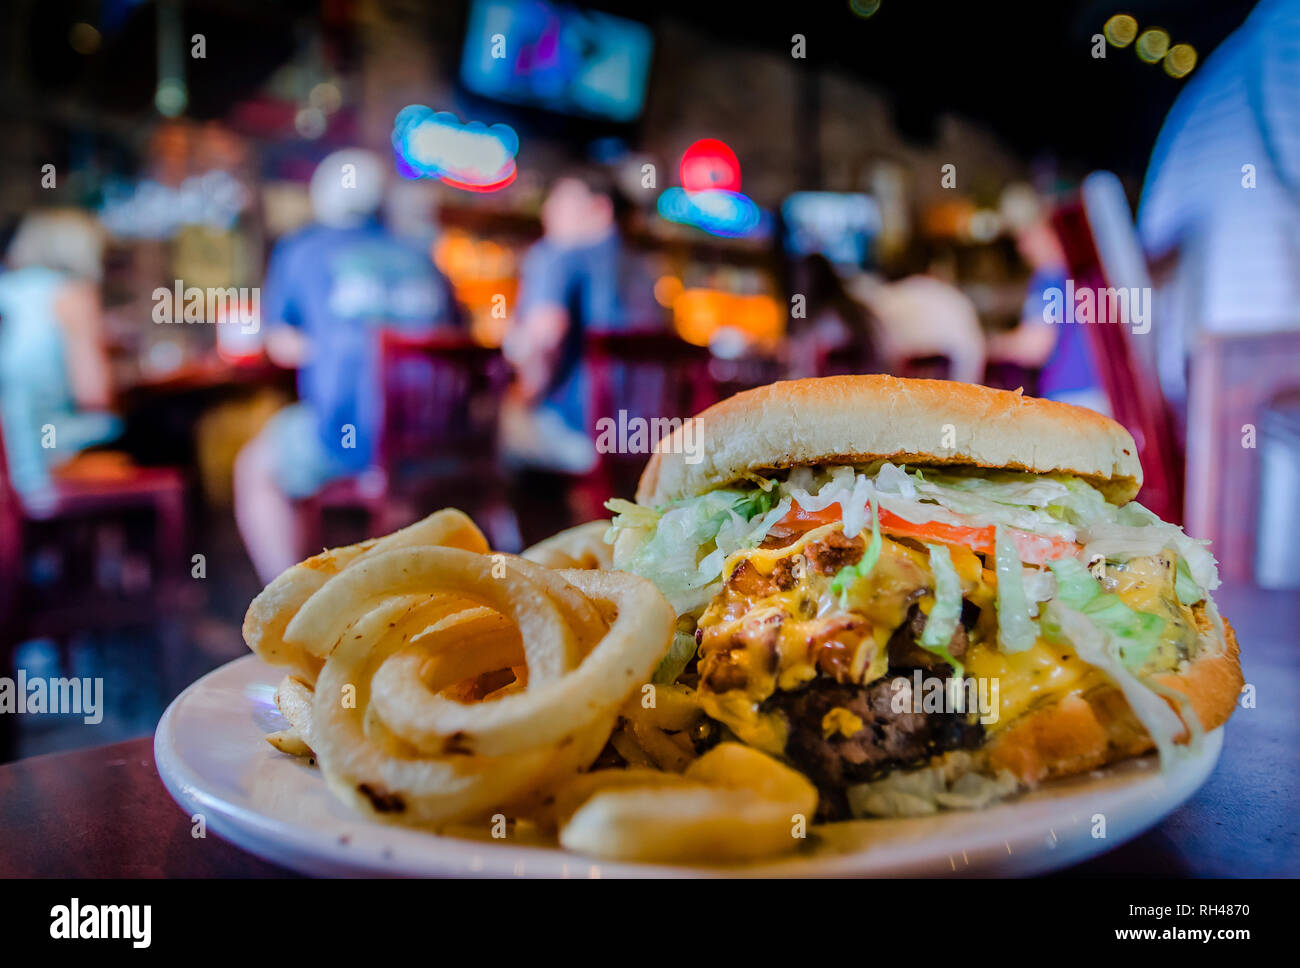 The Farmer Brown cheeseburger features Angus beef, American cheese, and hickory-smoked bacon at Buffalo Phil's in Tuscaloosa, Alabama. Stock Photo